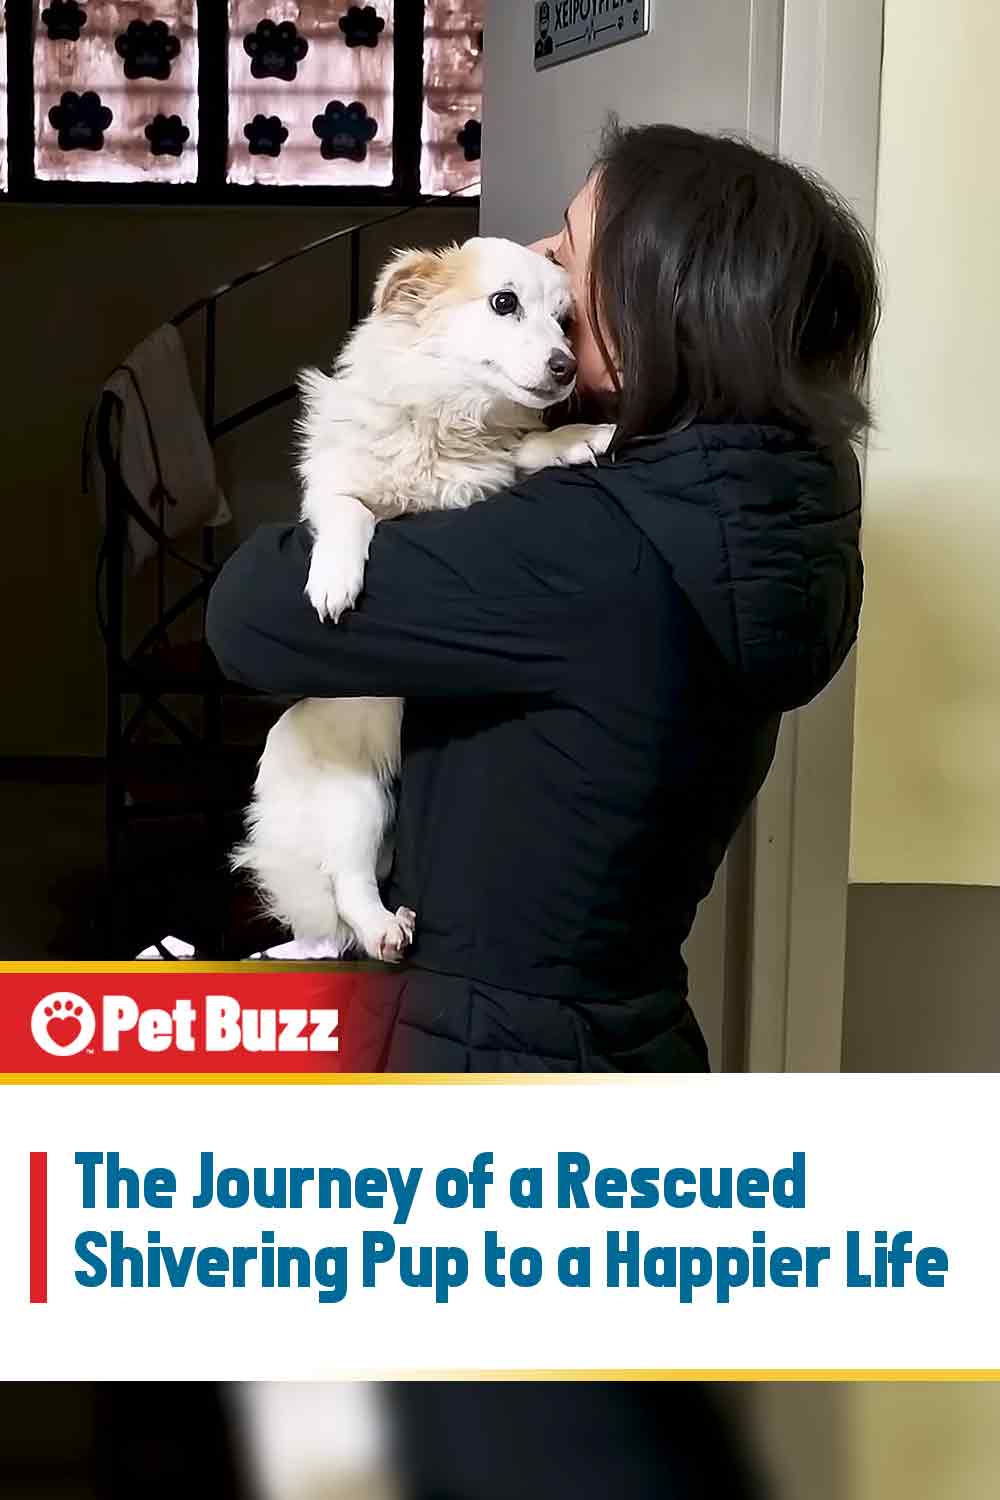 The Journey of a Rescued Shivering Pup to a Happier Life